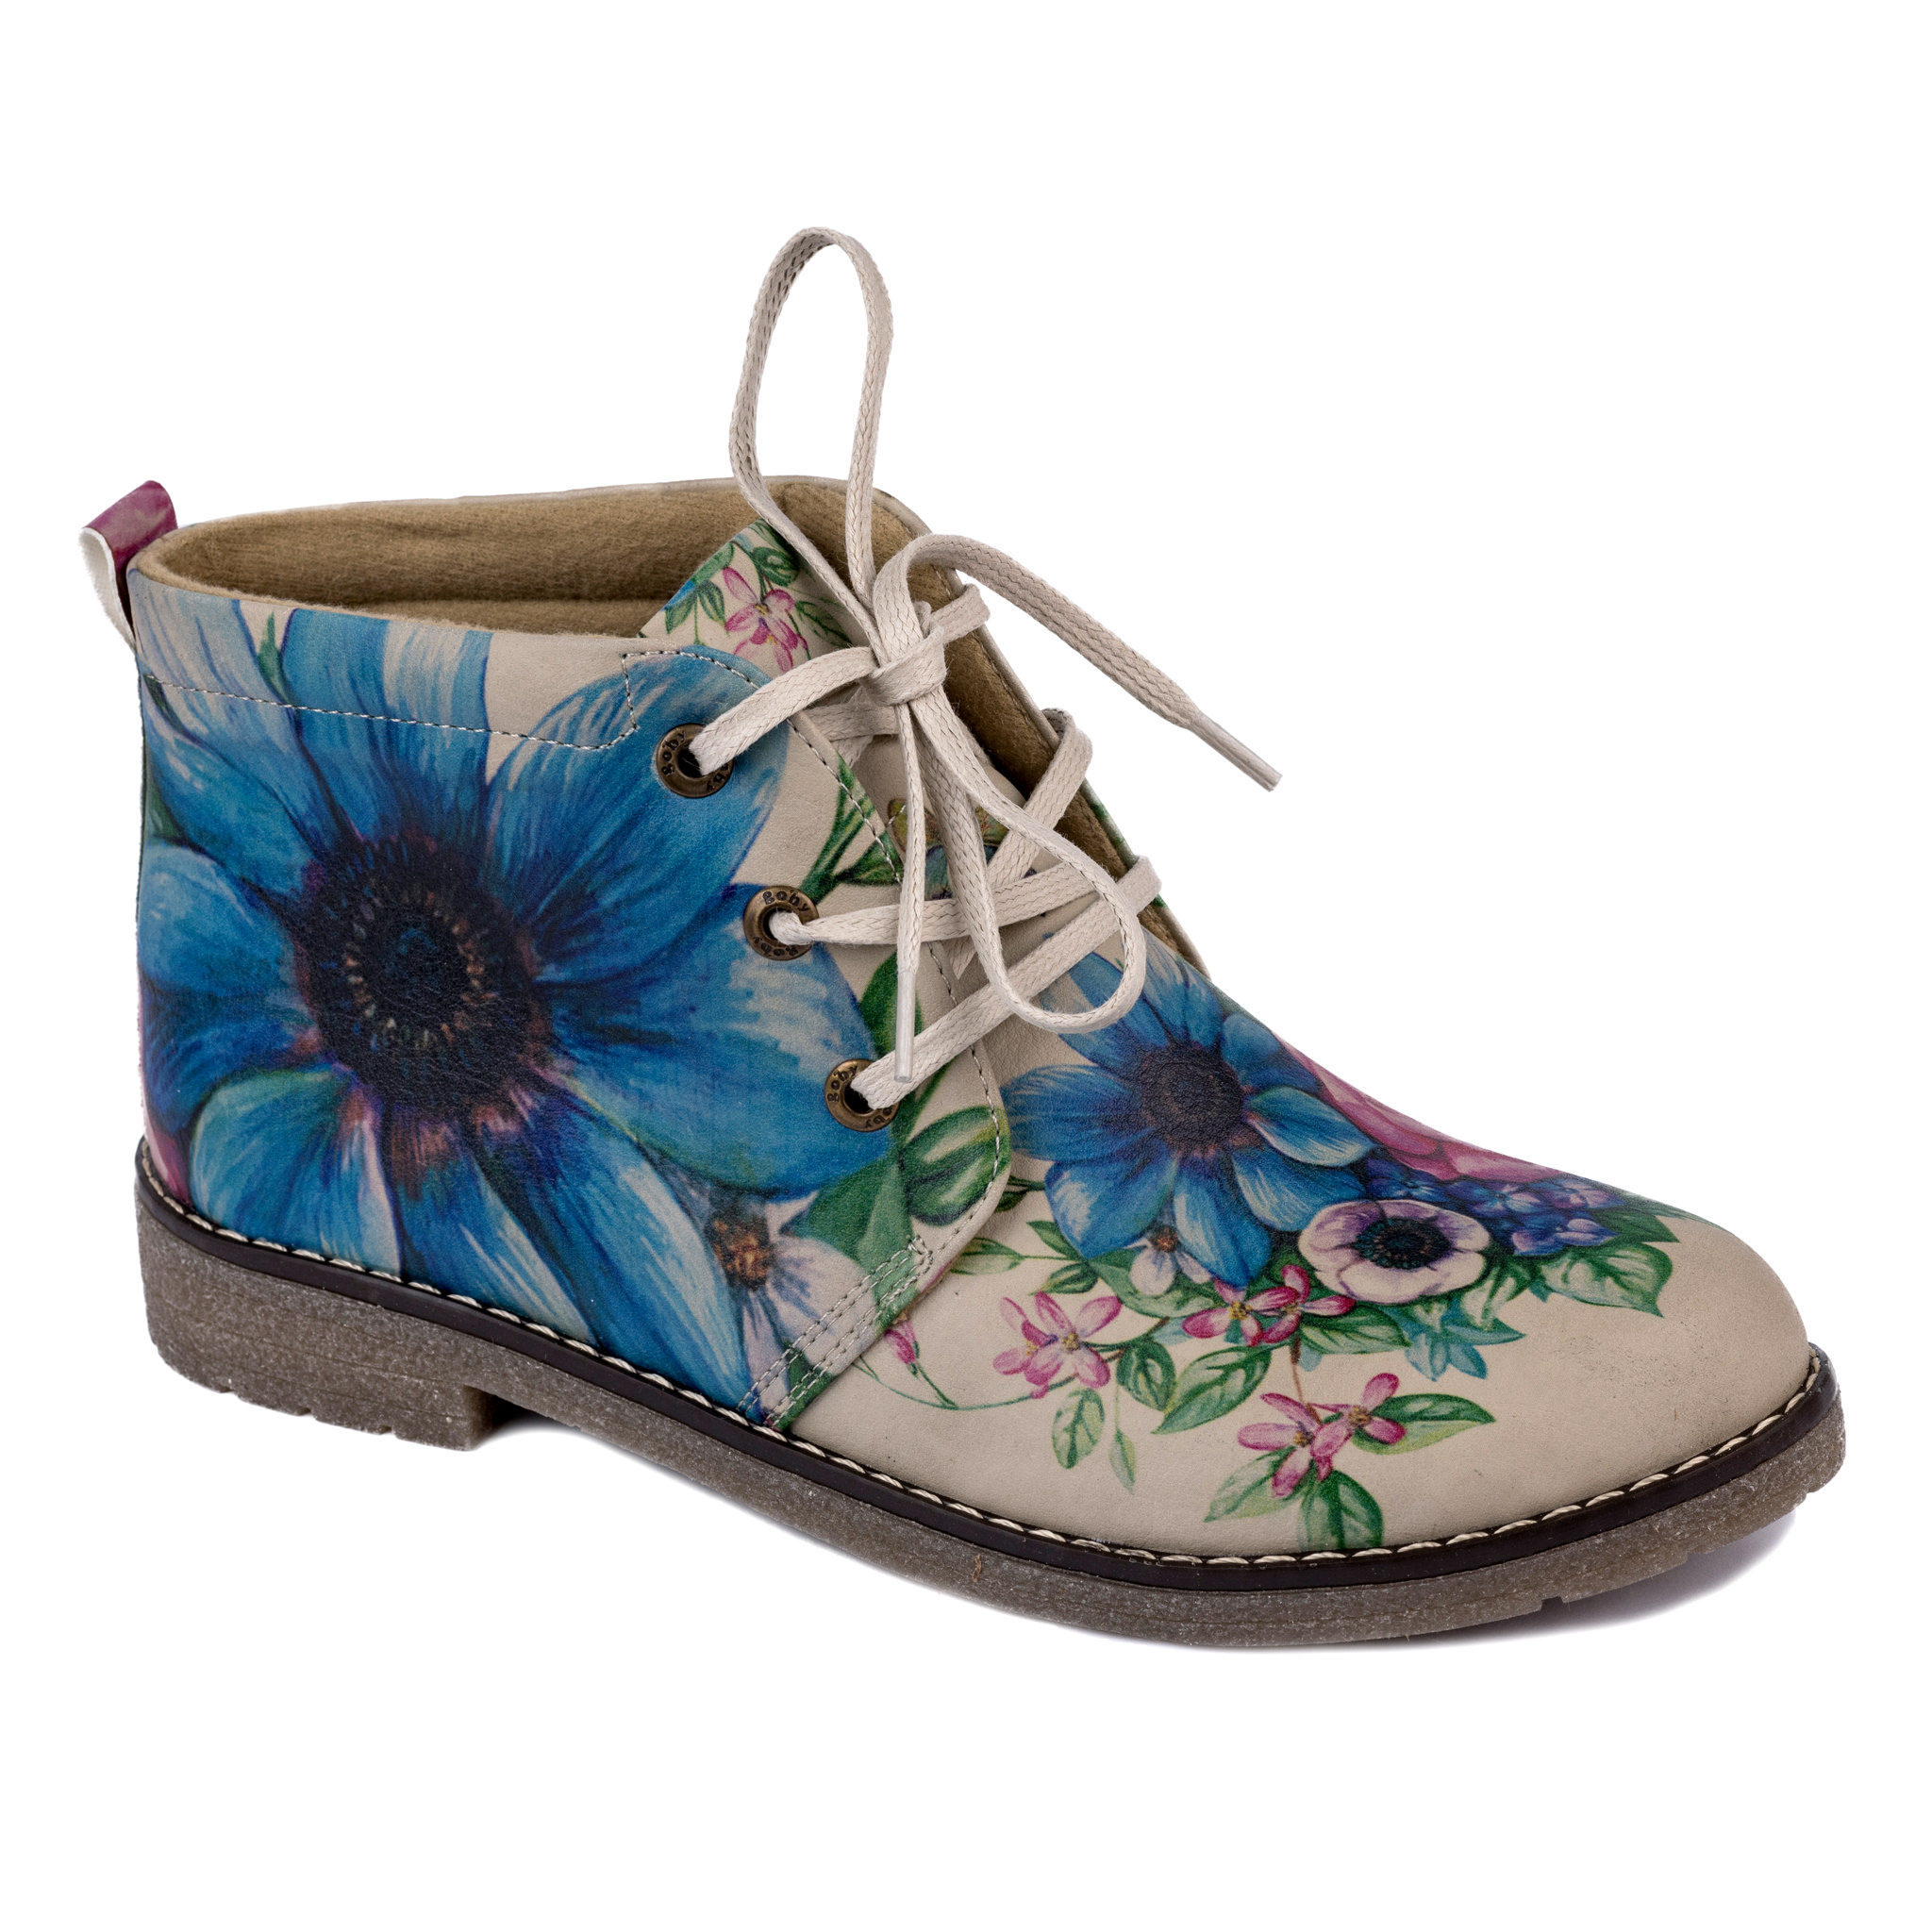 SHOES WITH FLOWER PRINT - BEIGE